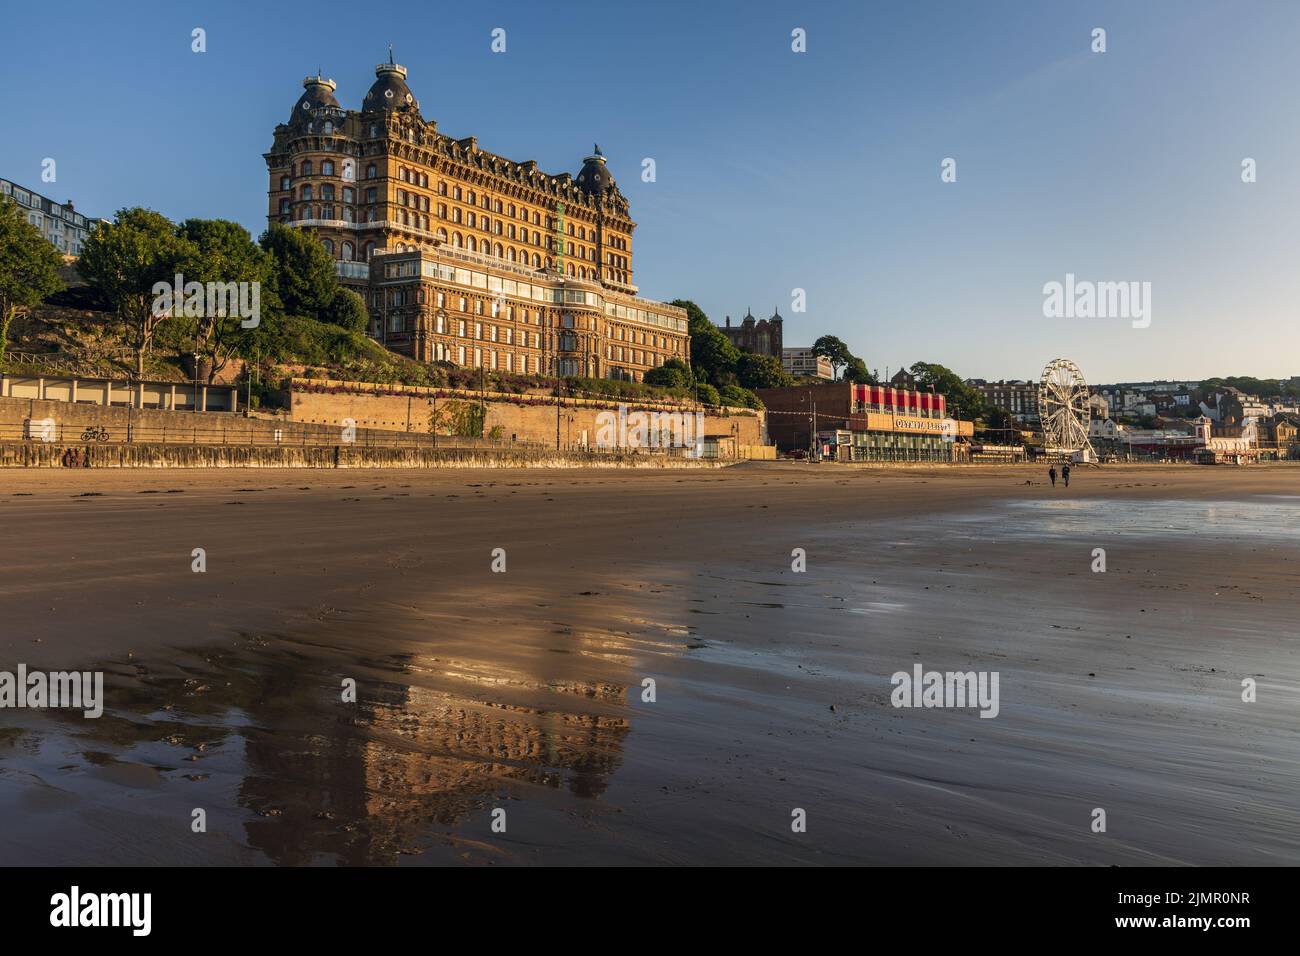 The Grand Hotel and South Bay beach and seafront at Scarborough, North Yorkshire coast, England. Stock Photo